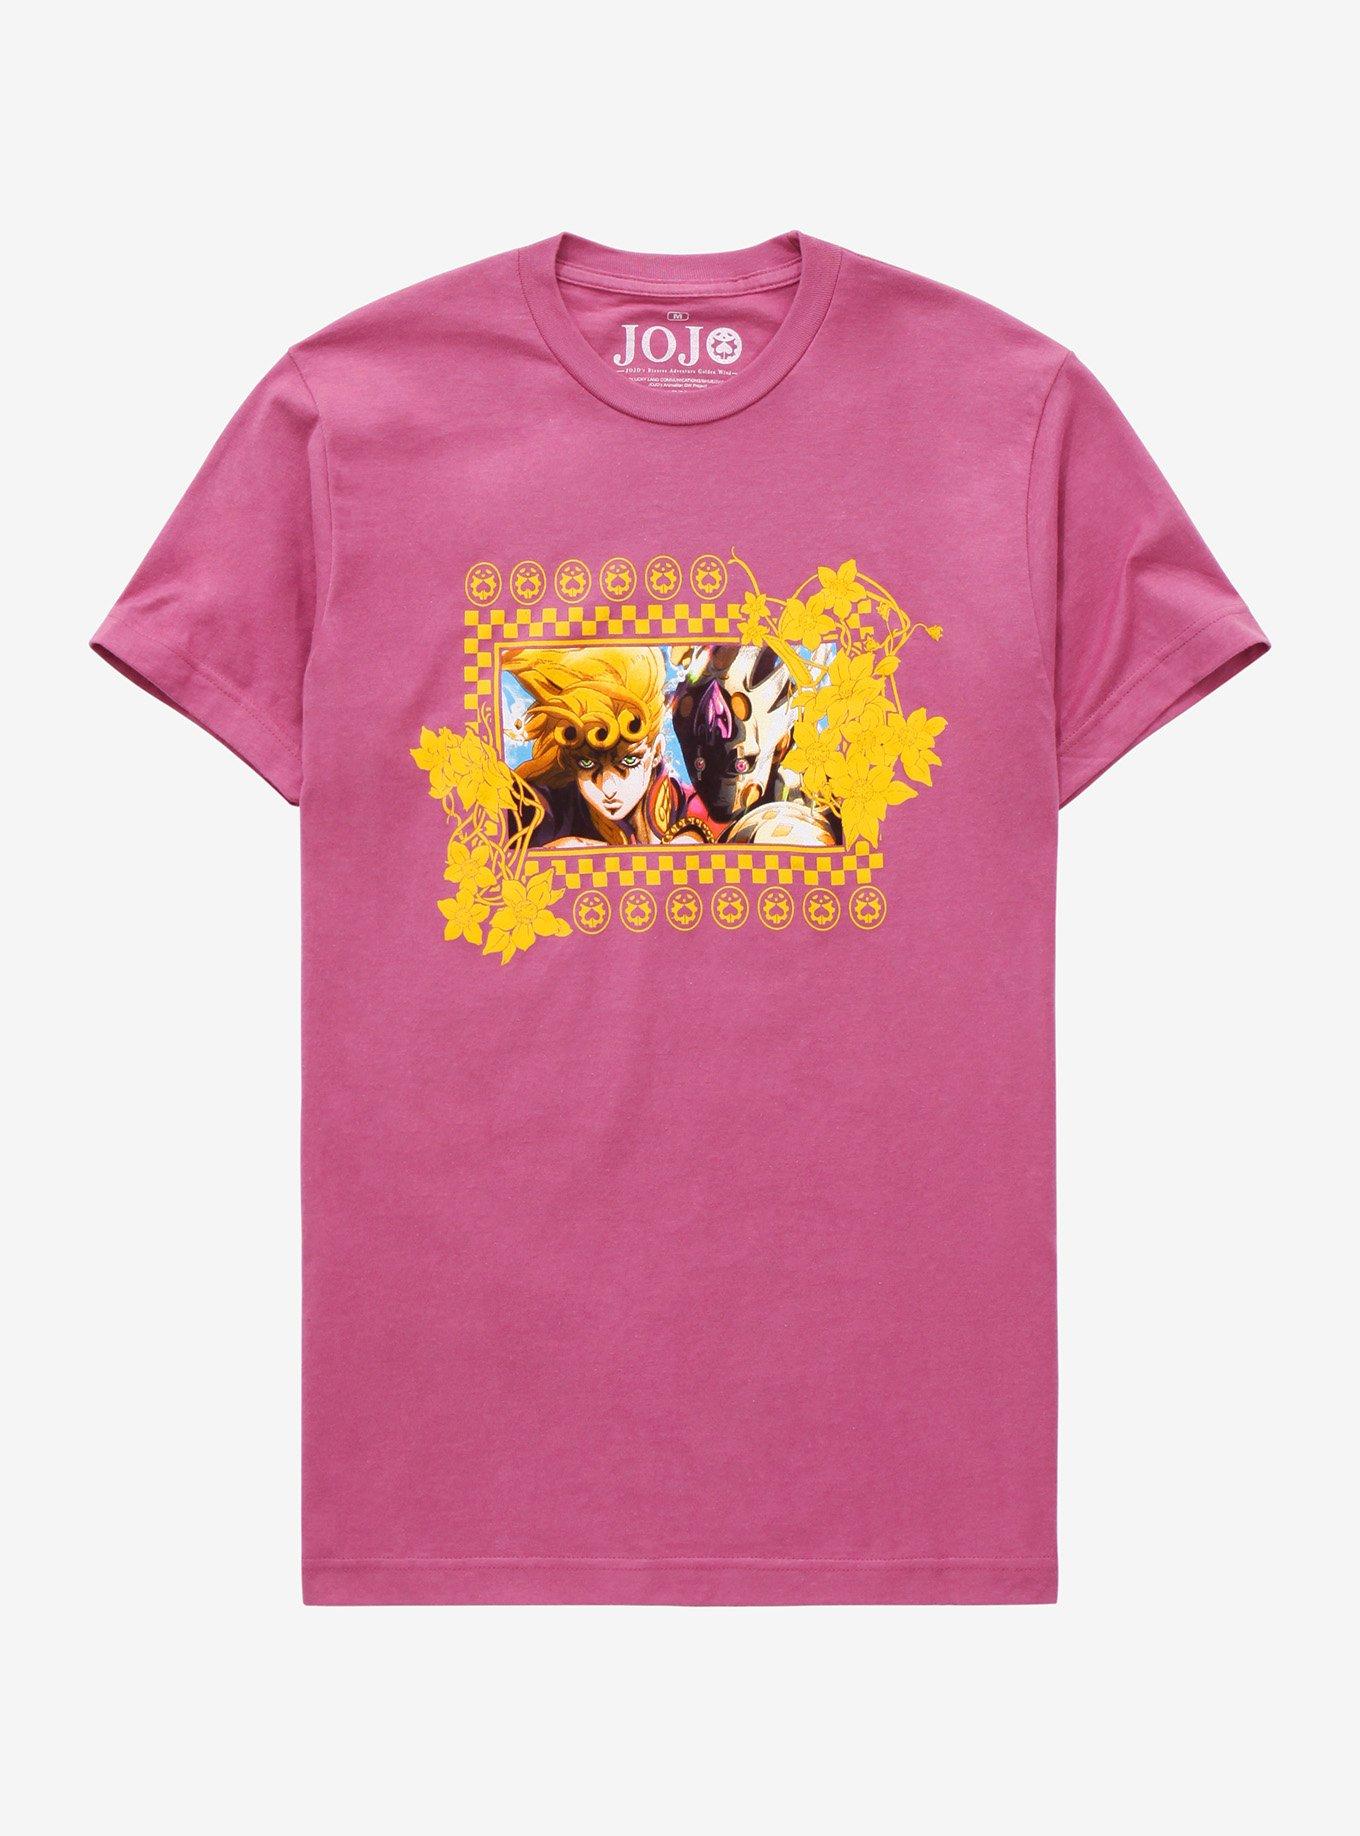 JoJo's Bizarre Adventure Giorno & Gold Experience Requiem T-Shirt - BoxLunch Exclusive, PINK, hi-res